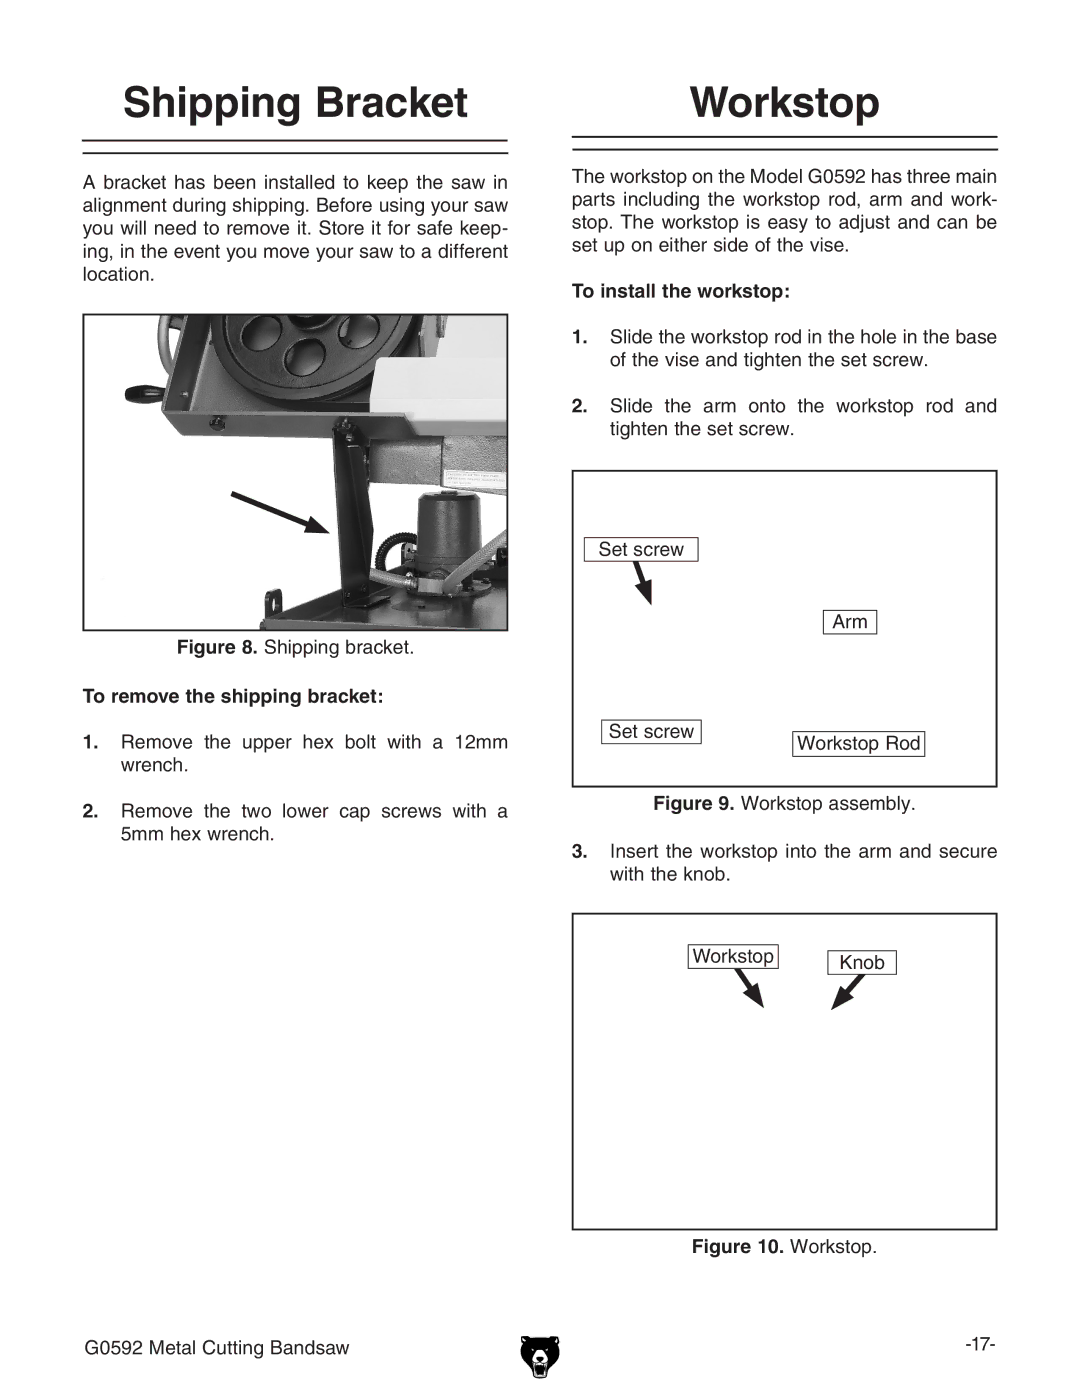 Grizzly G0592 owner manual Shipping Bracket, Workstop, To remove the shipping bracket, To install the workstop 